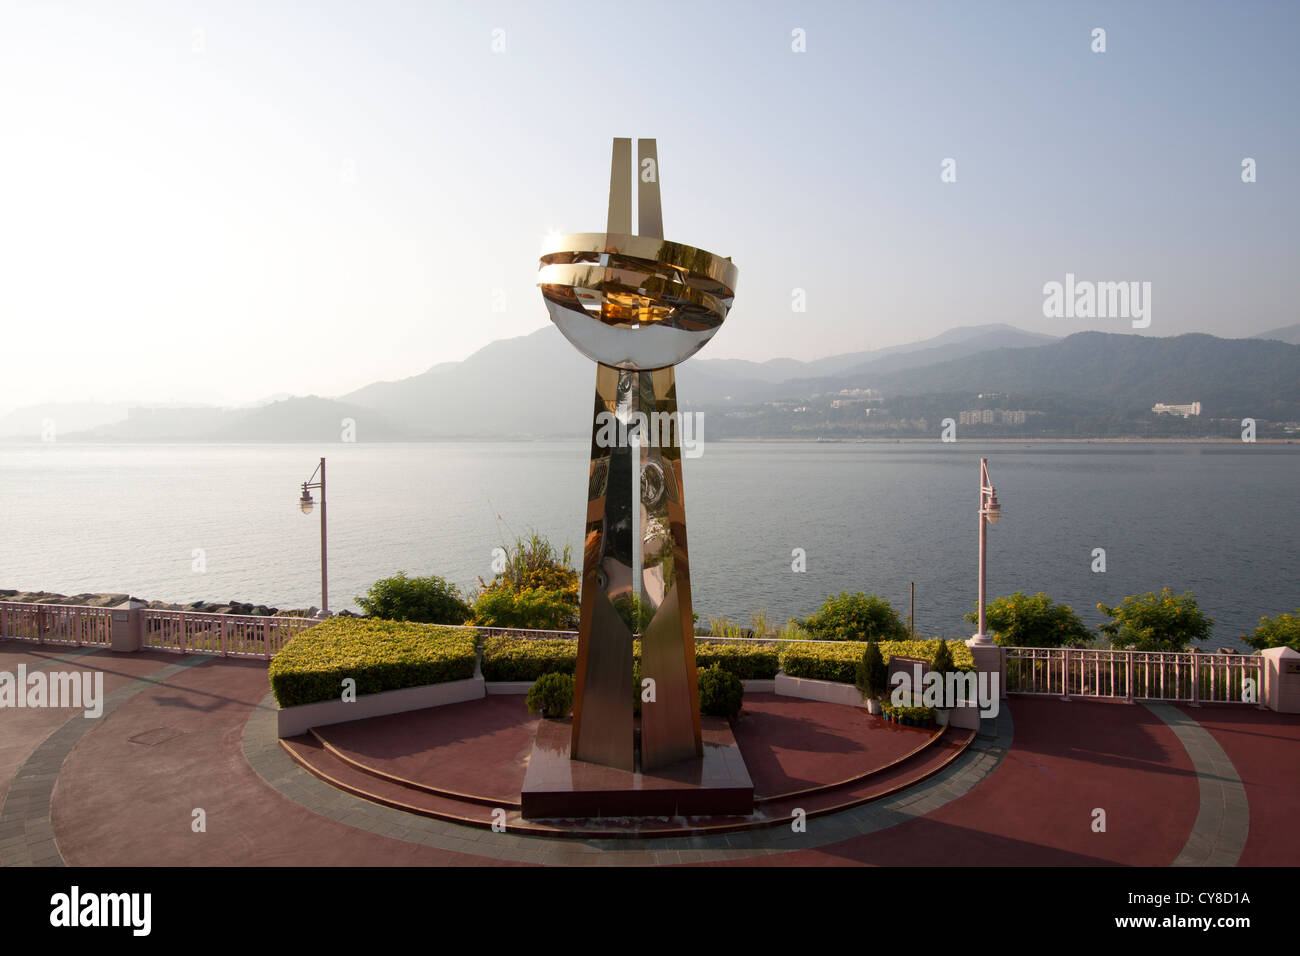 Sculpture in Hong Kong, Tai Po waterfront to commemorate 10th Anniversary of HKSAR Stock Photo